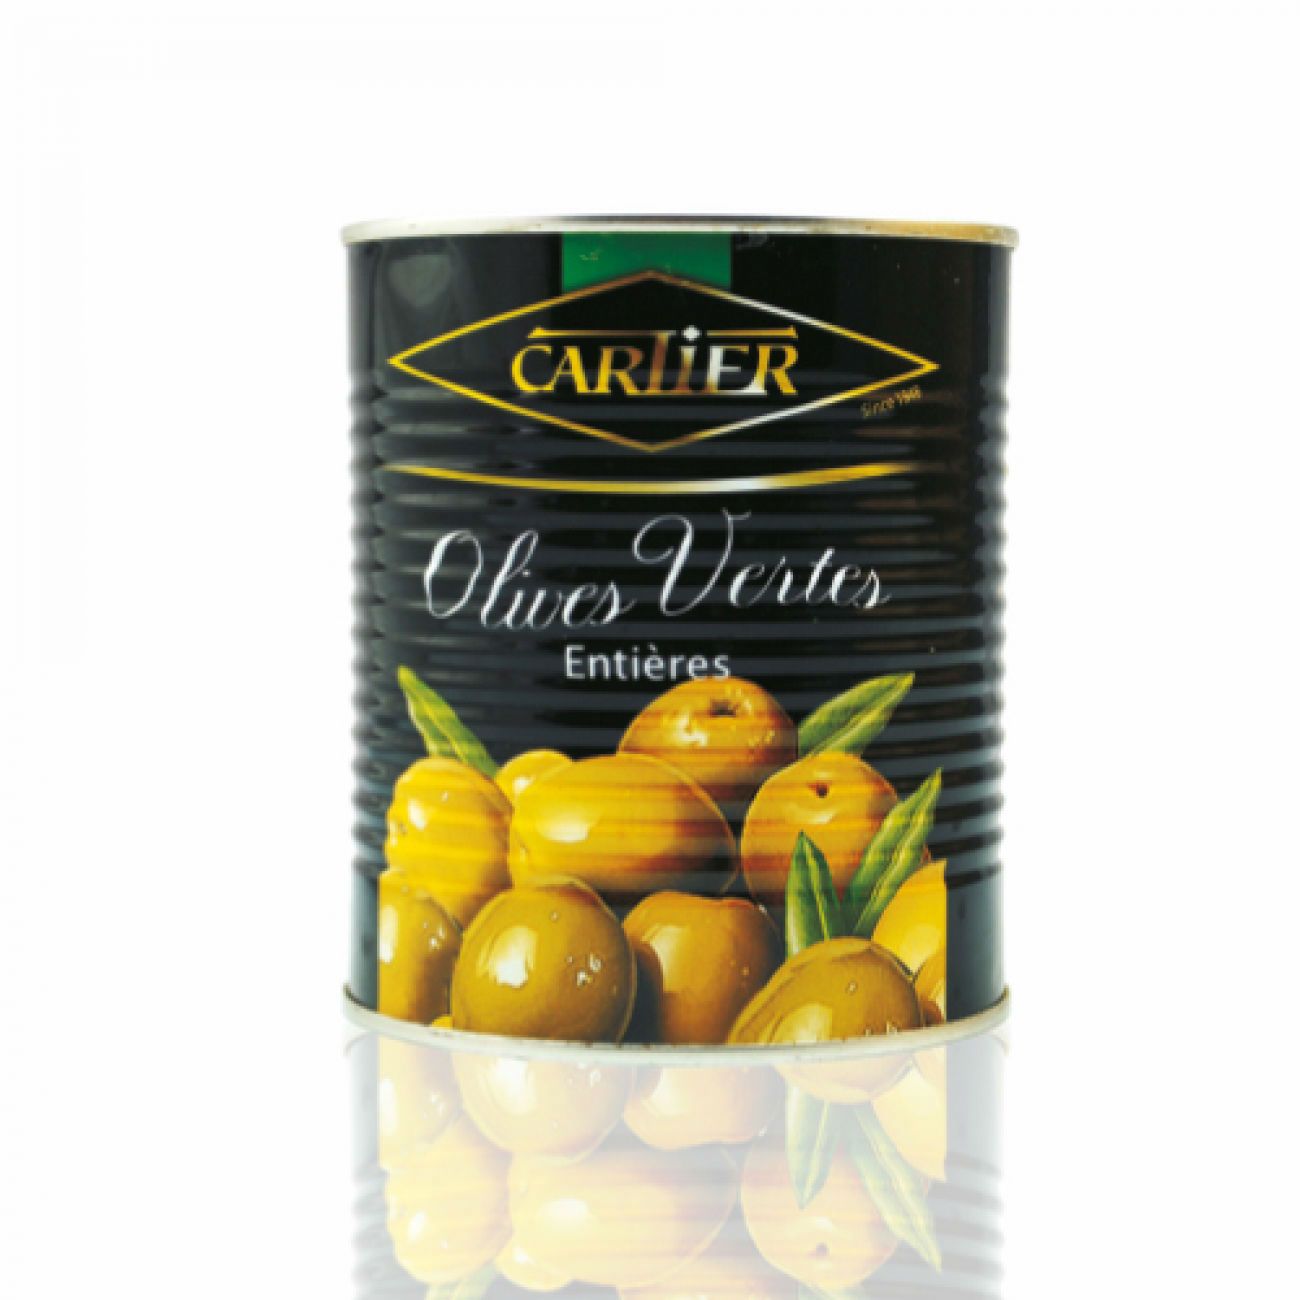 Cartier Green Whole Olives (850ml) - Aytac Foods